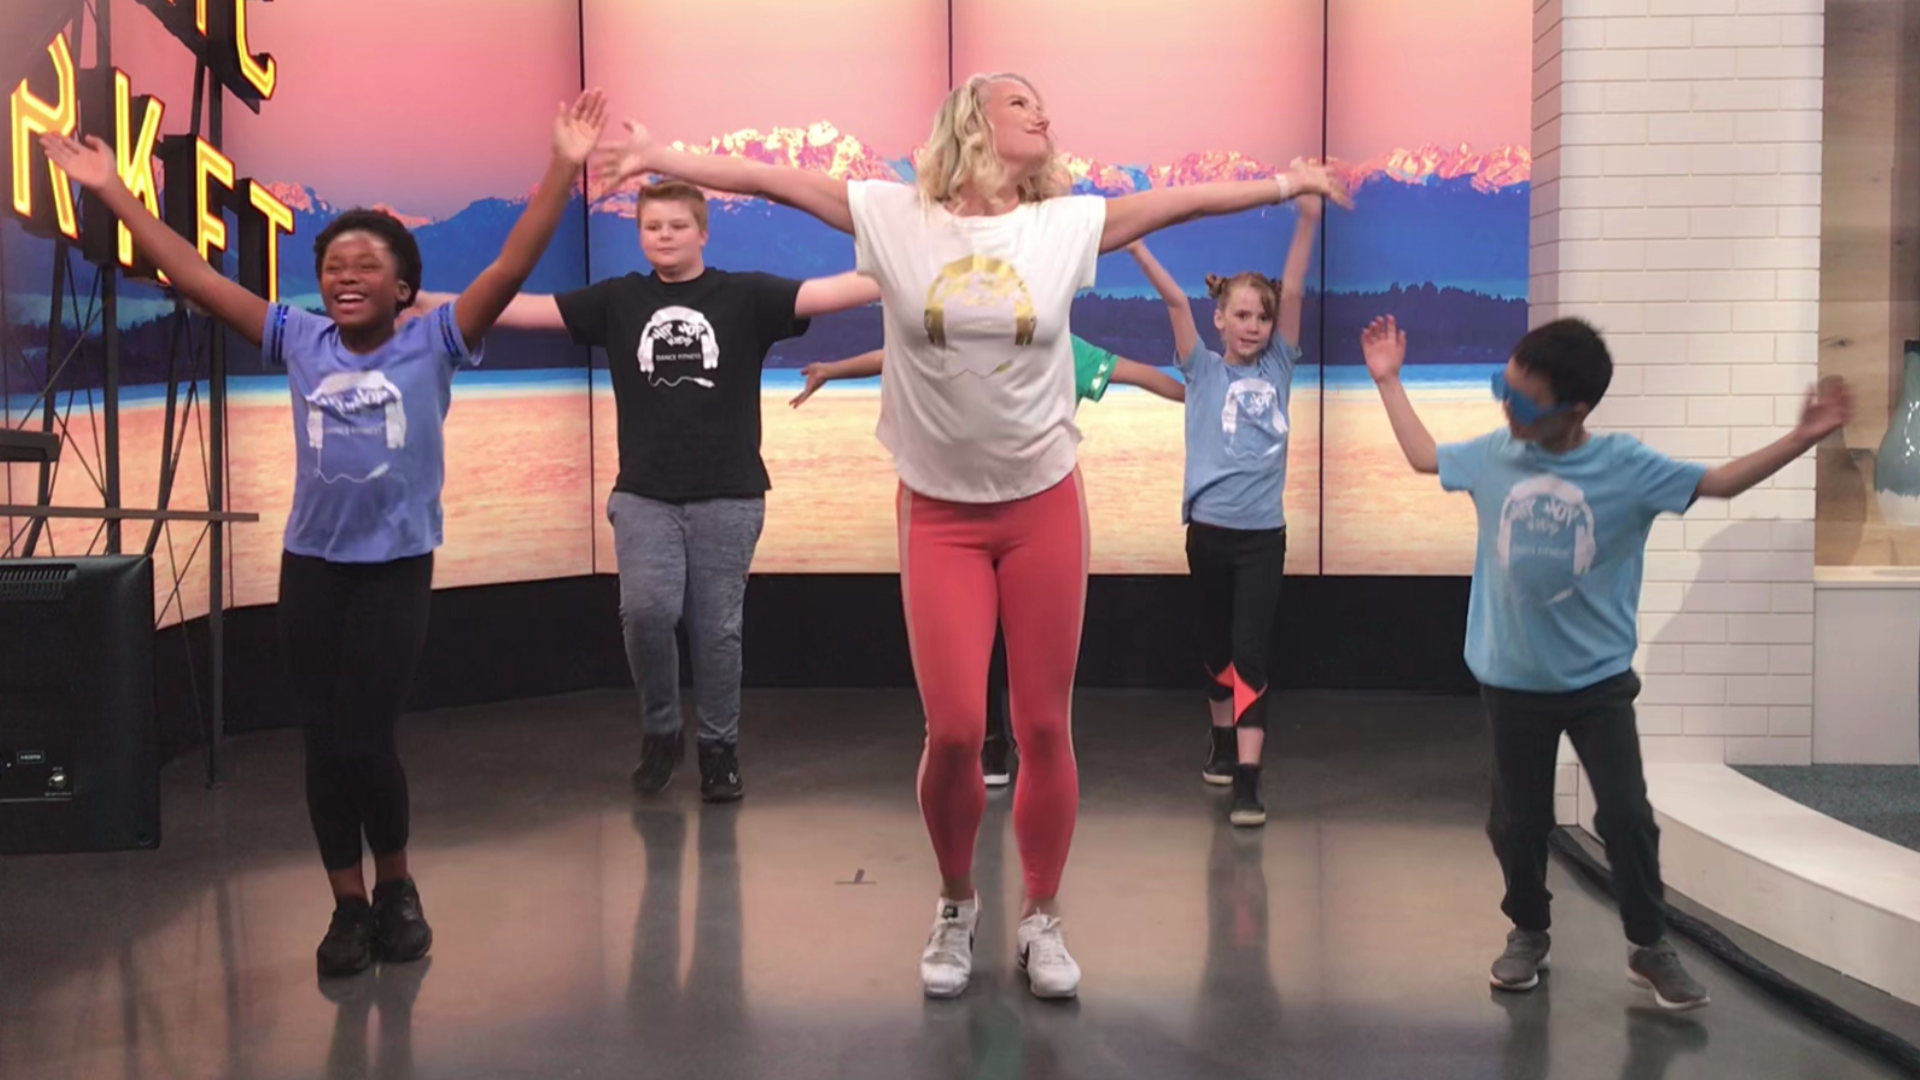 A weekly class held at schools across Western Washington aims to help kids work off excess energy while learning to be more flexible and coordinated. #newdaynw